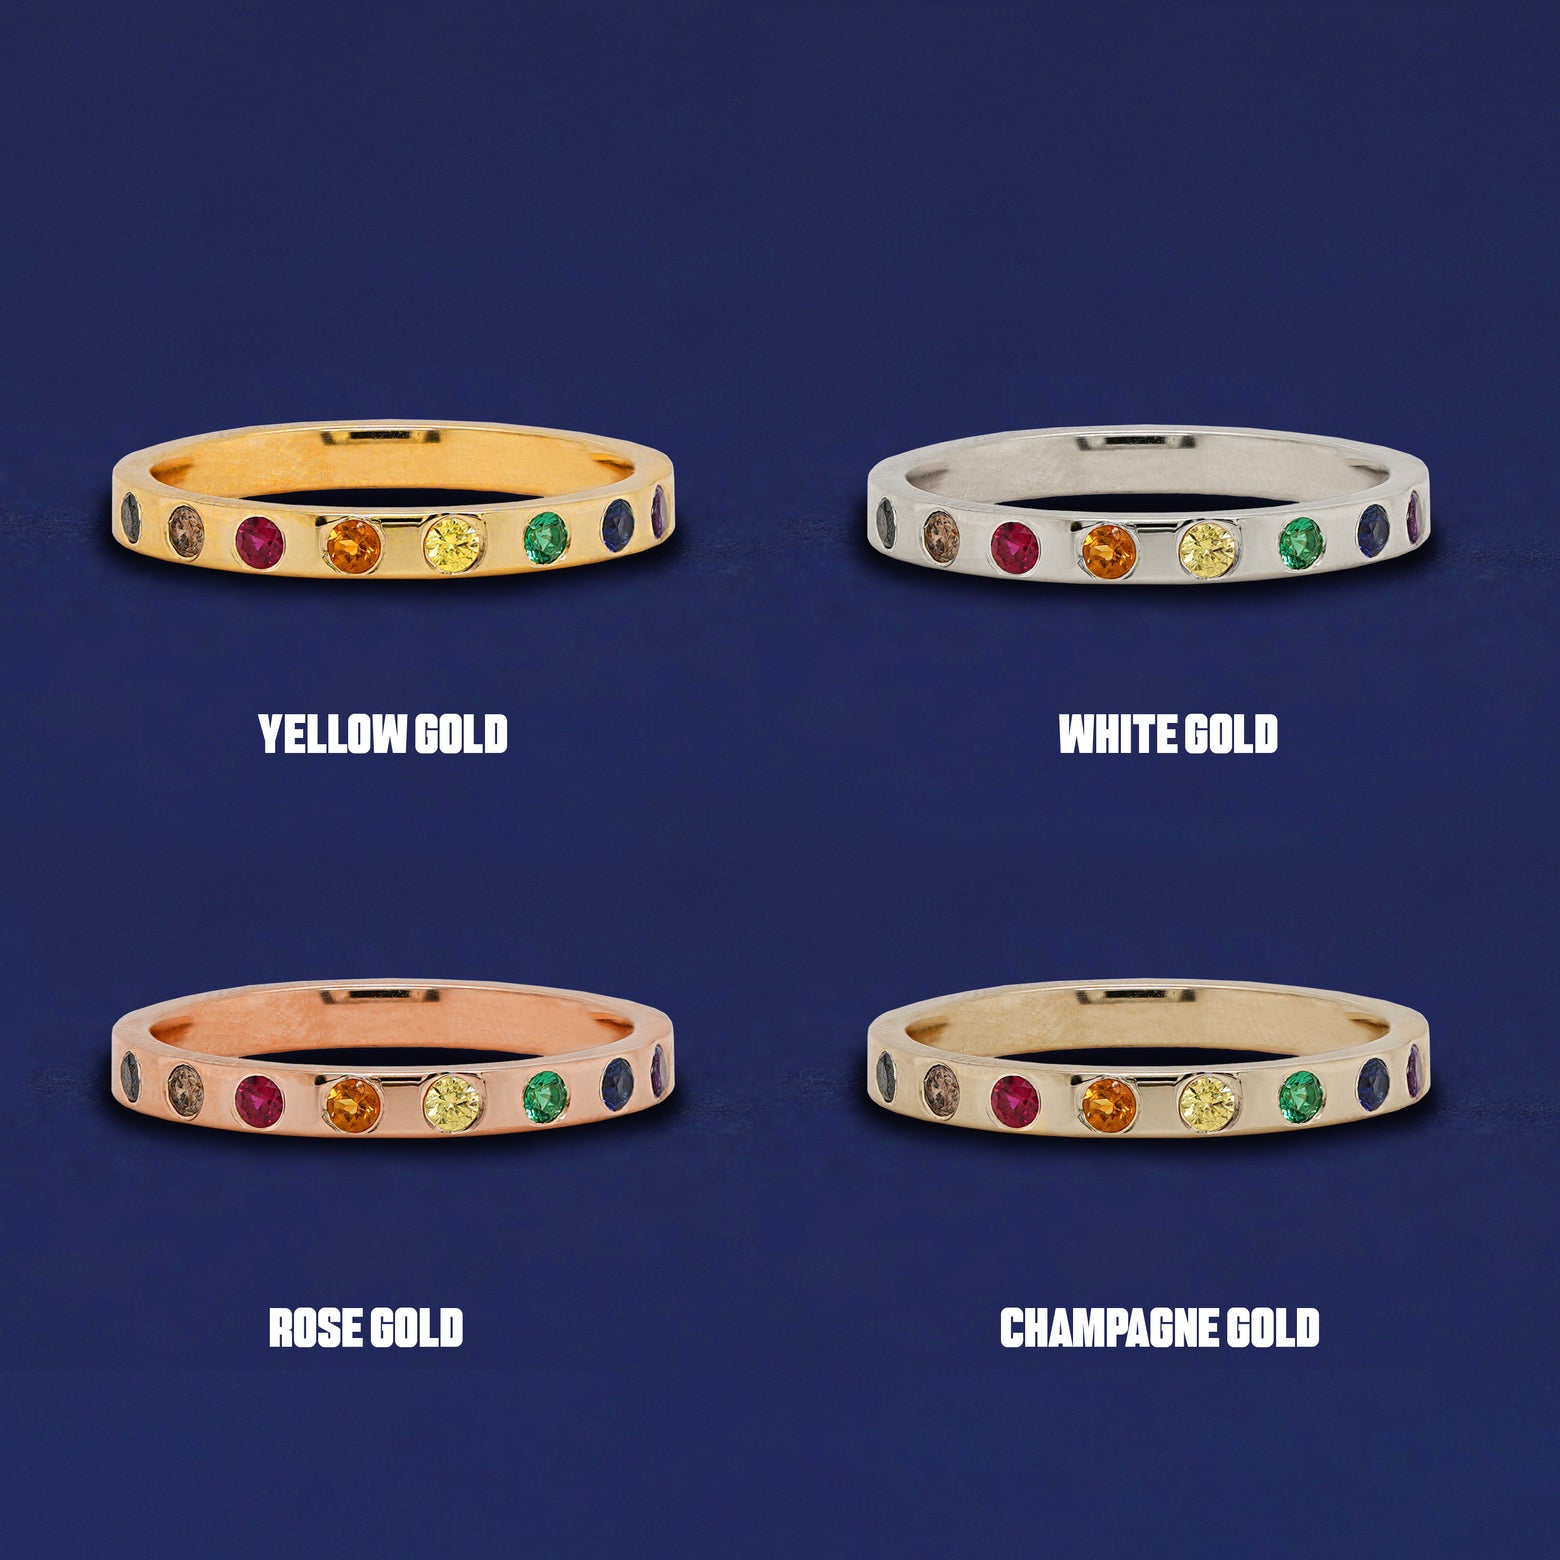 Four versions of the Rainbow Band shown in options of yellow, white, rose and champagne gold